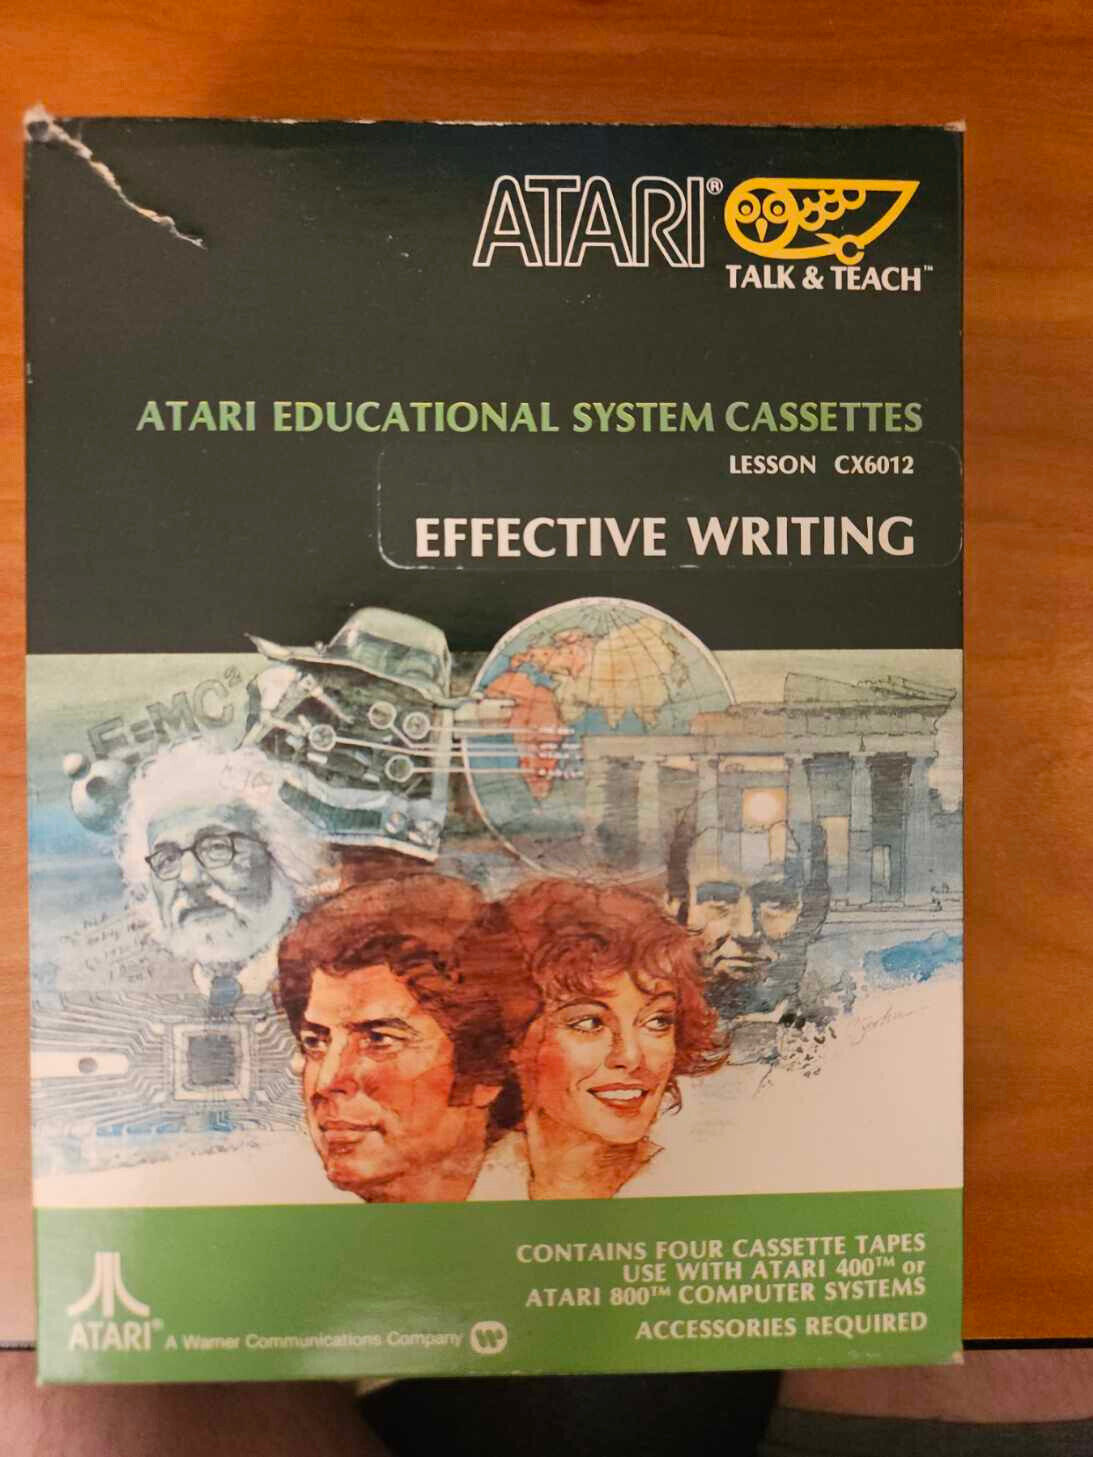 Atari 400 / 800 Educational System Cassettes - Effective Writing CX6012